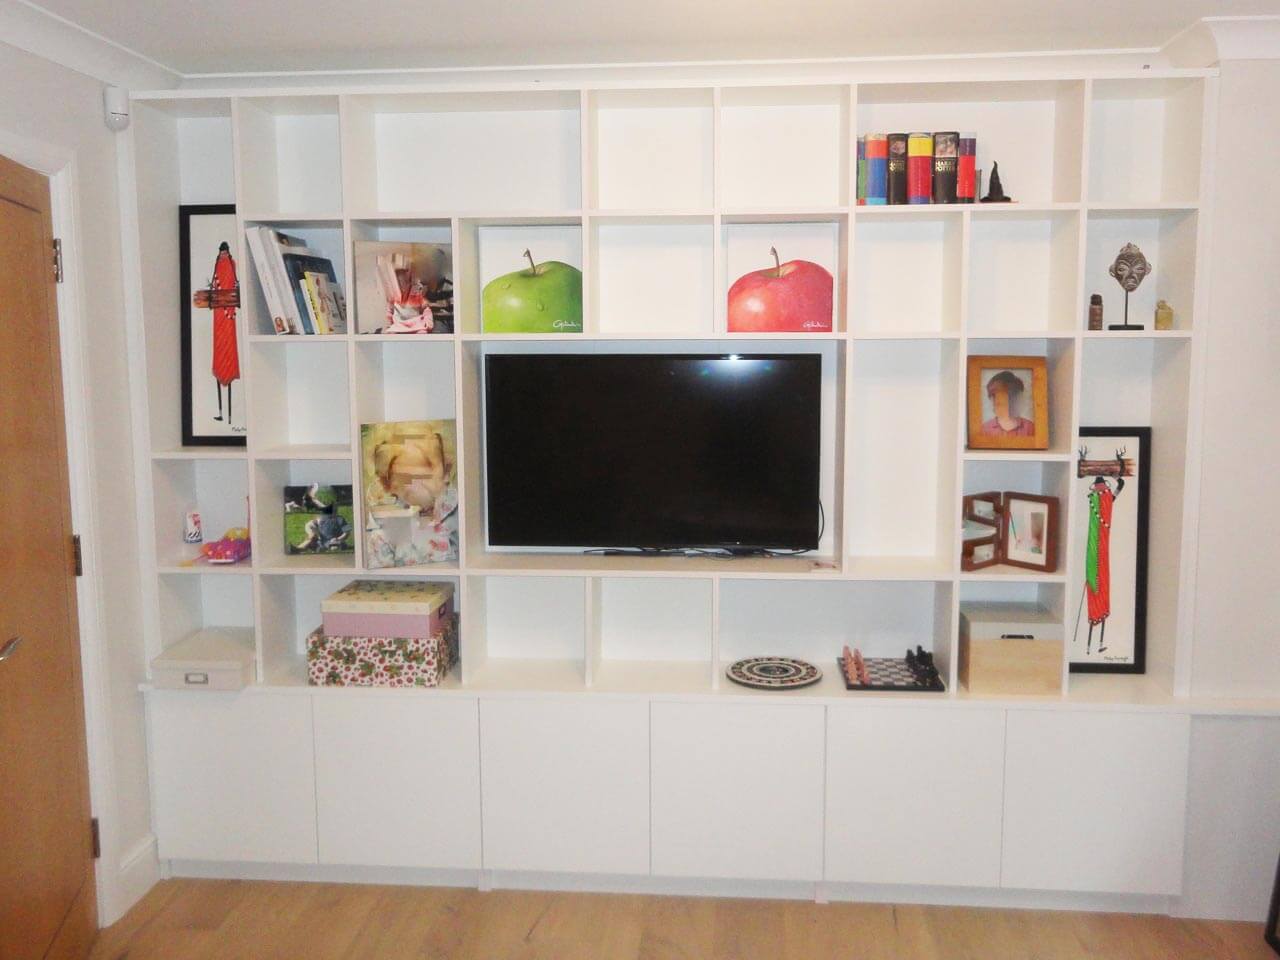 Media Room Unit with Shelves and Art Work